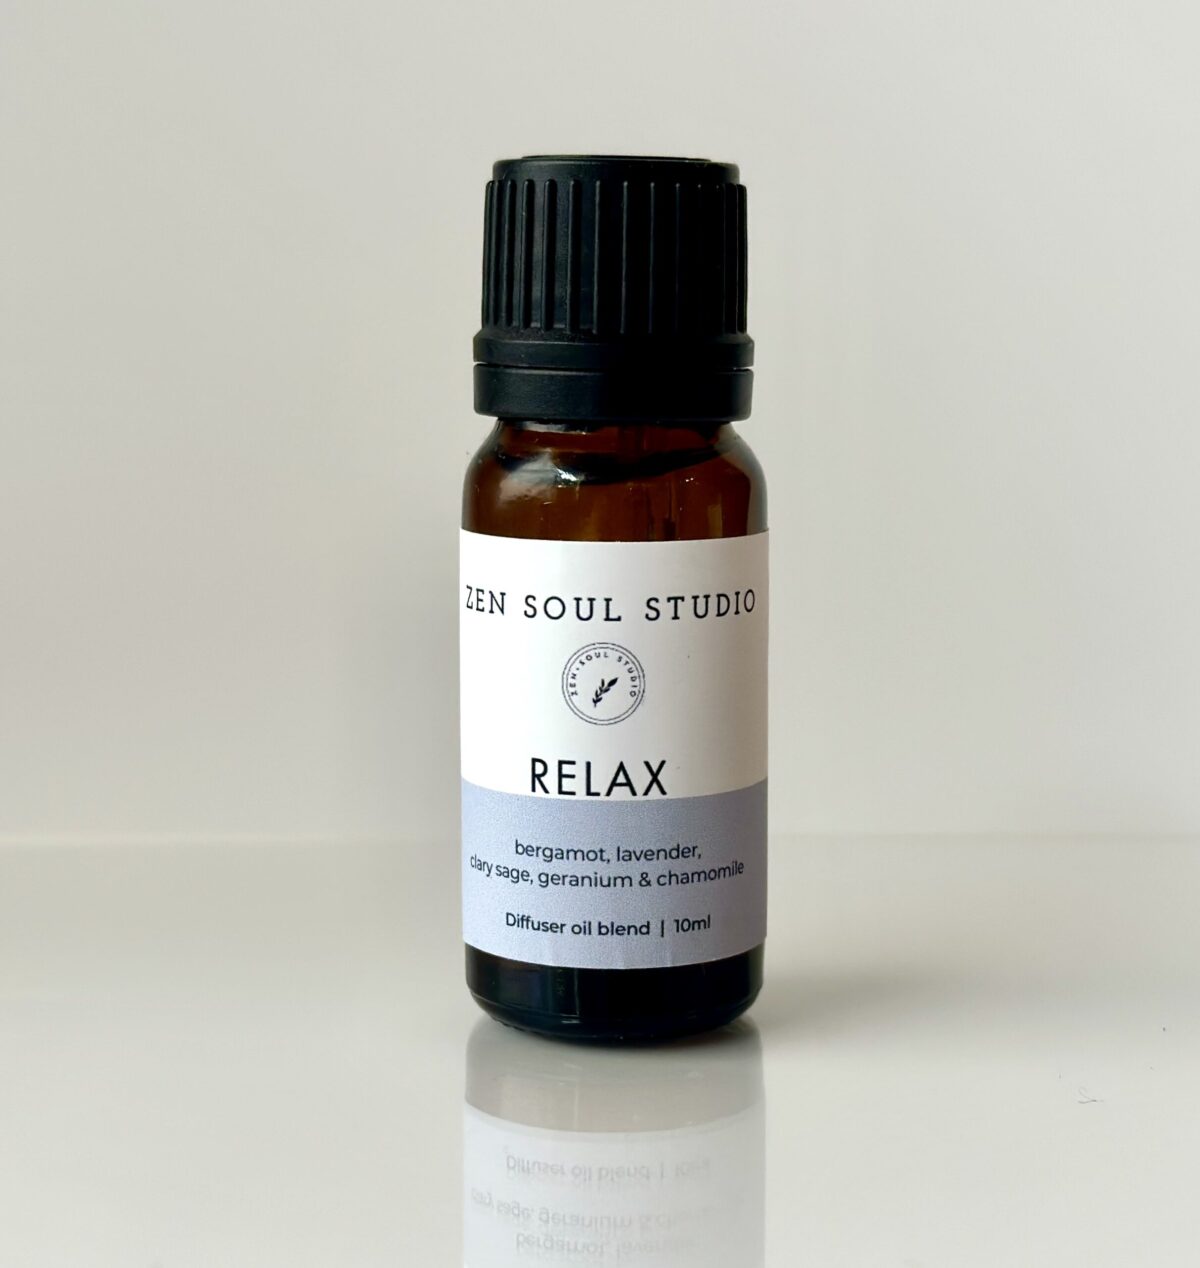 Relaxing aromatherapy blend